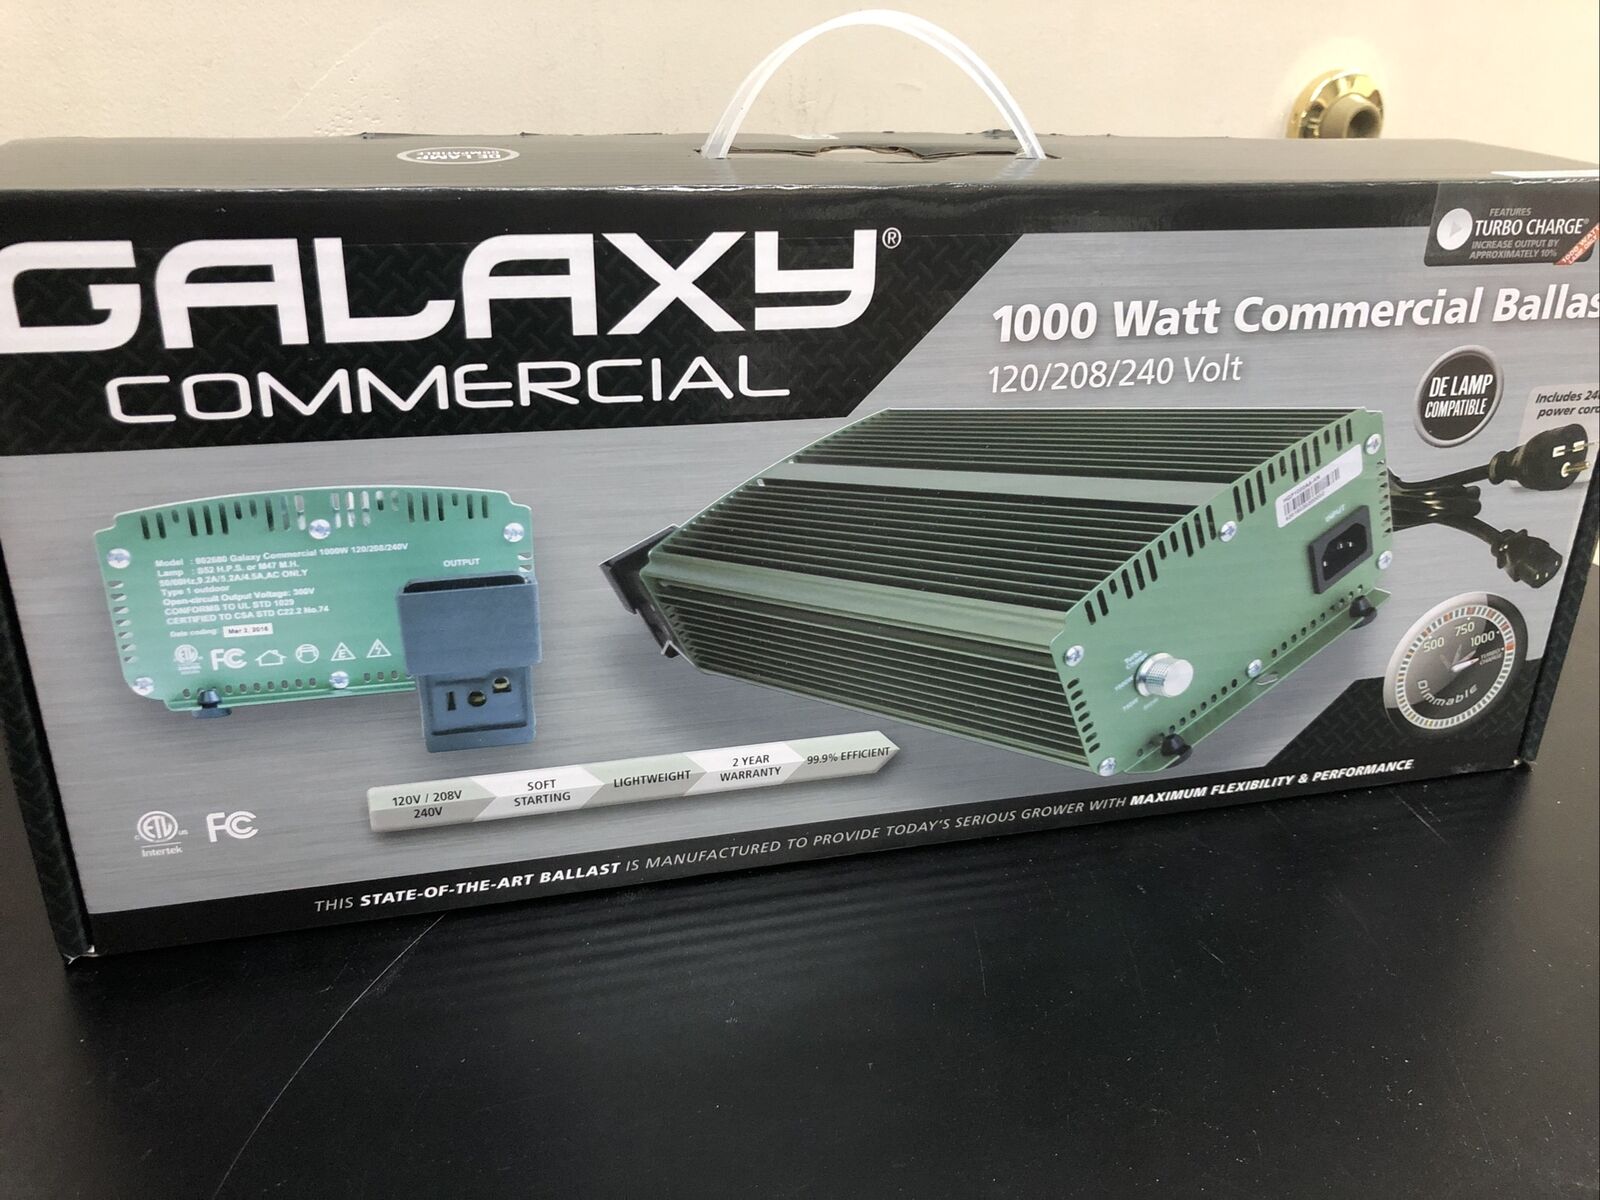 Lot of 4 Galaxy 902680 Commercial Ballast  500/750/1000W.